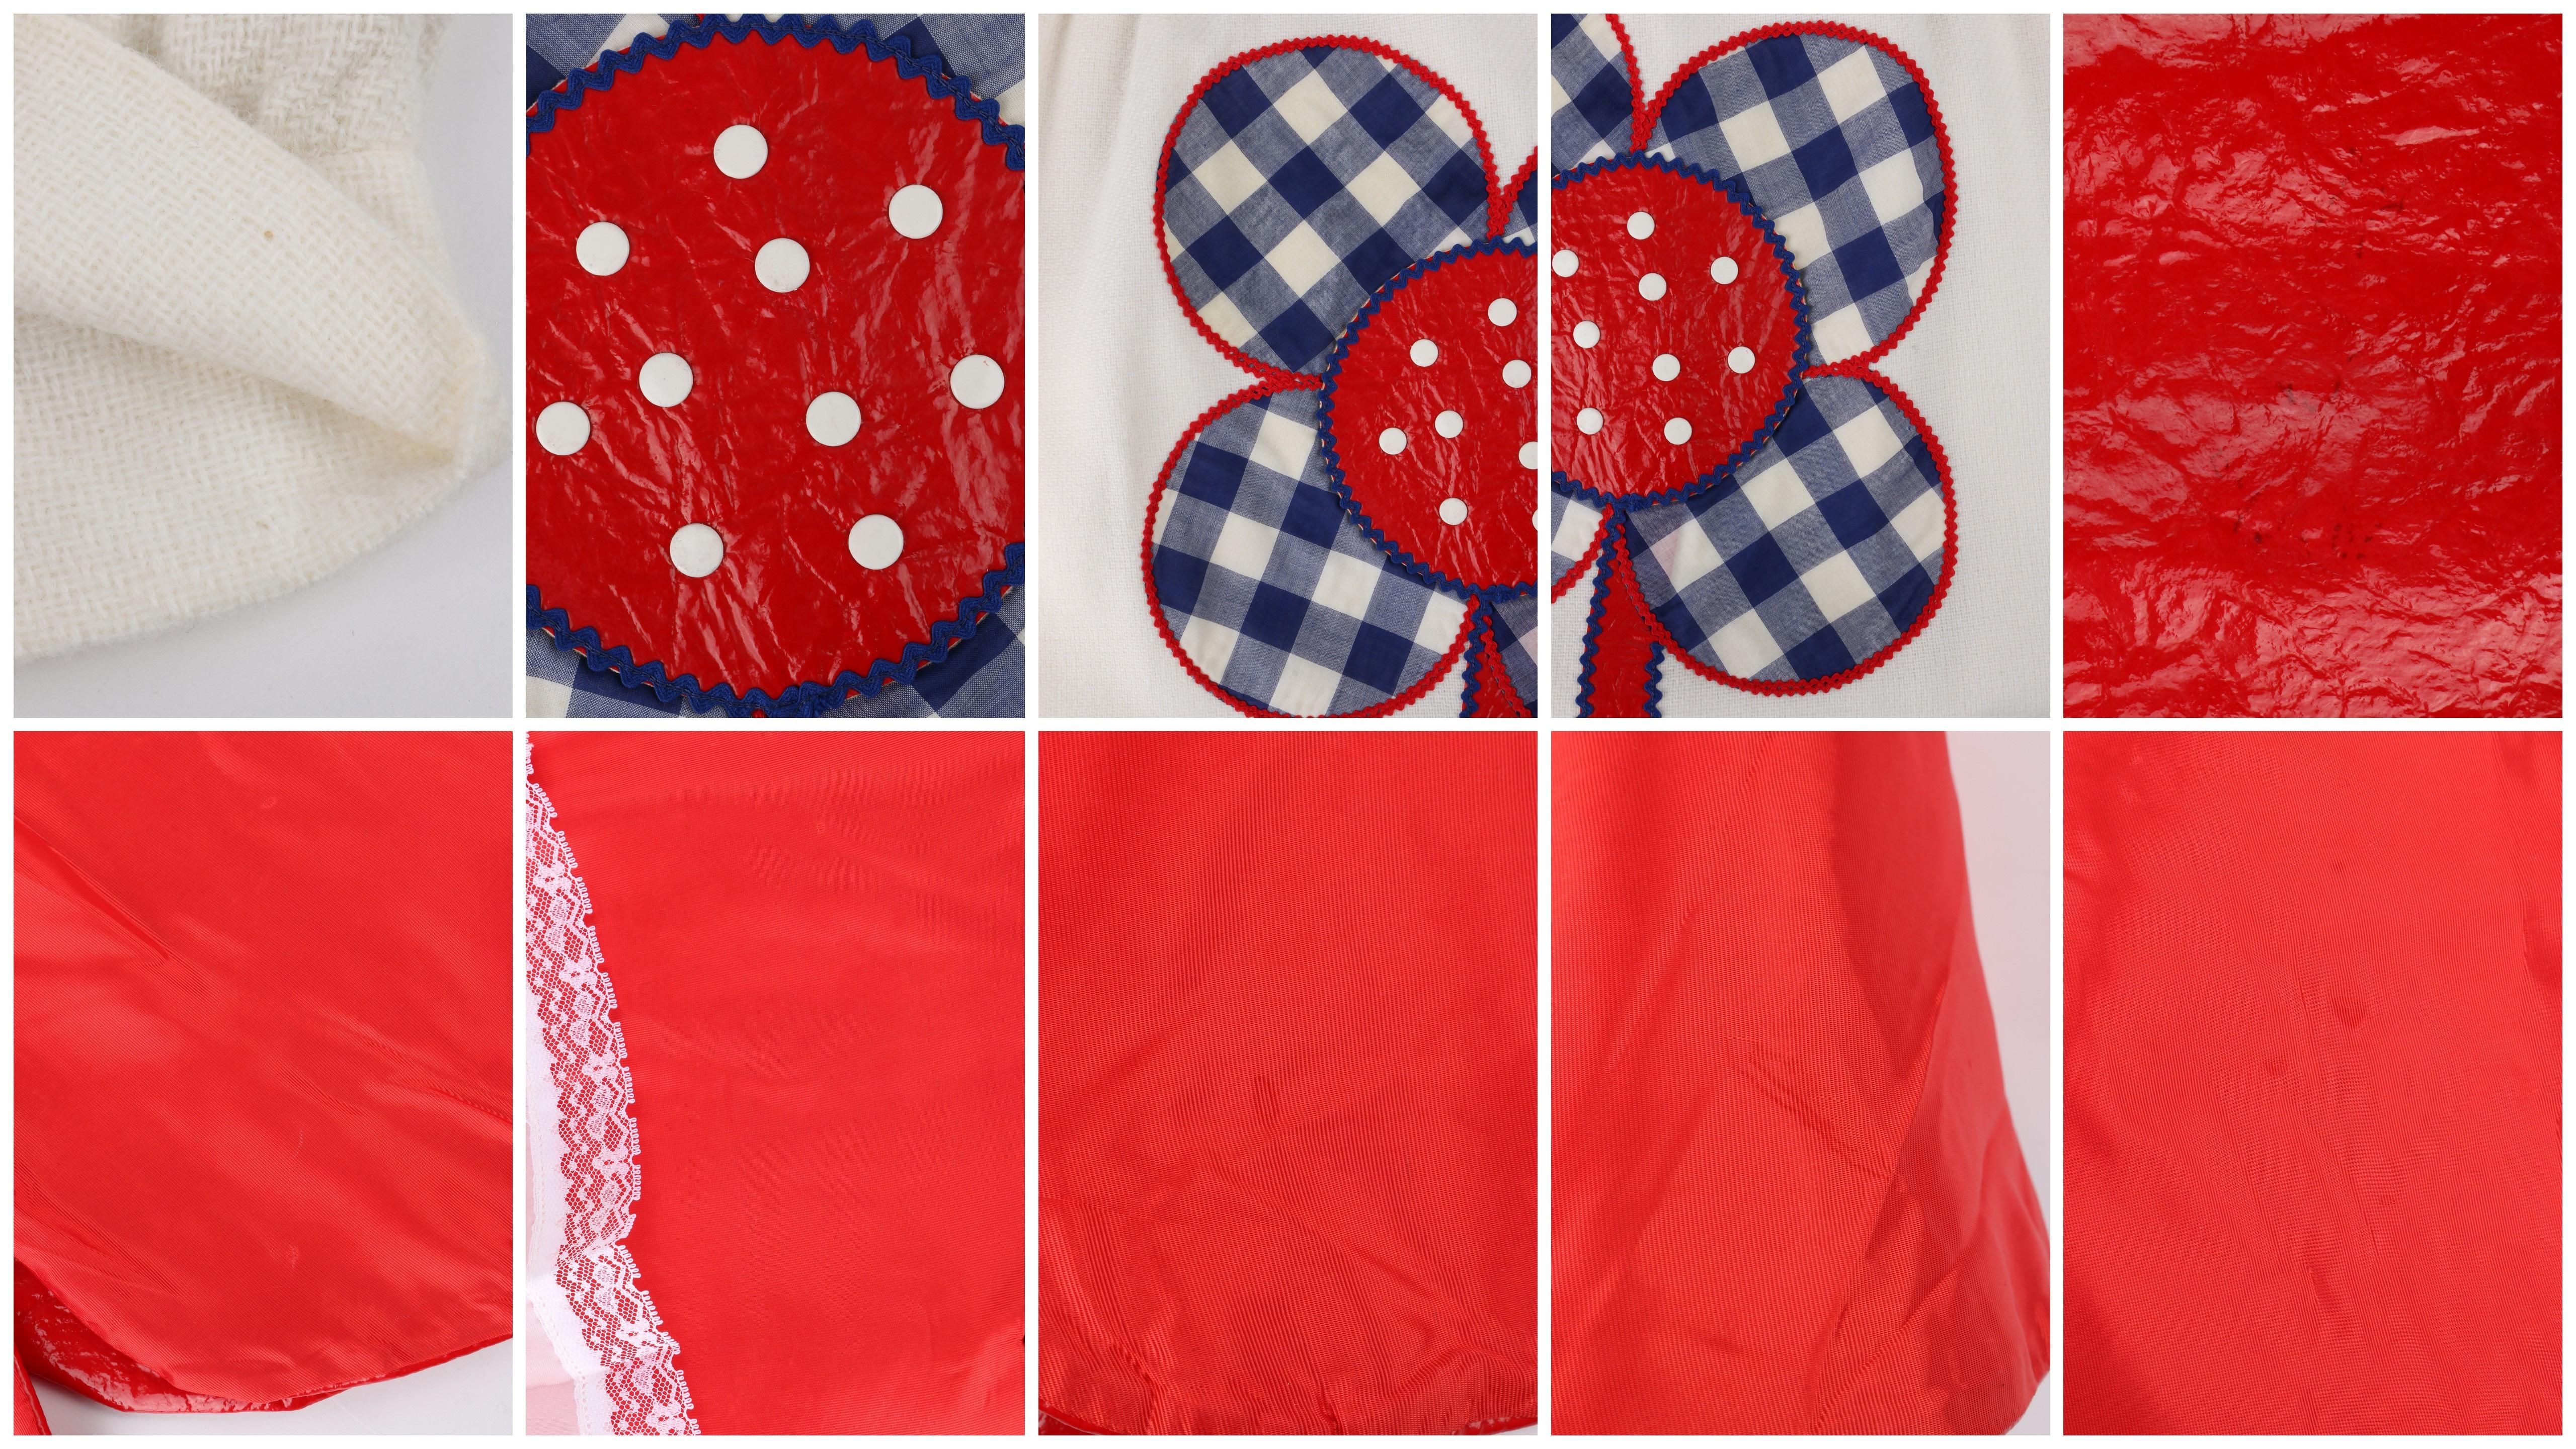 PATCHES ST LOUIS c.1970’s 3 Pc Red White Blue Gingham Floral Top Skirt Belt Set For Sale 5